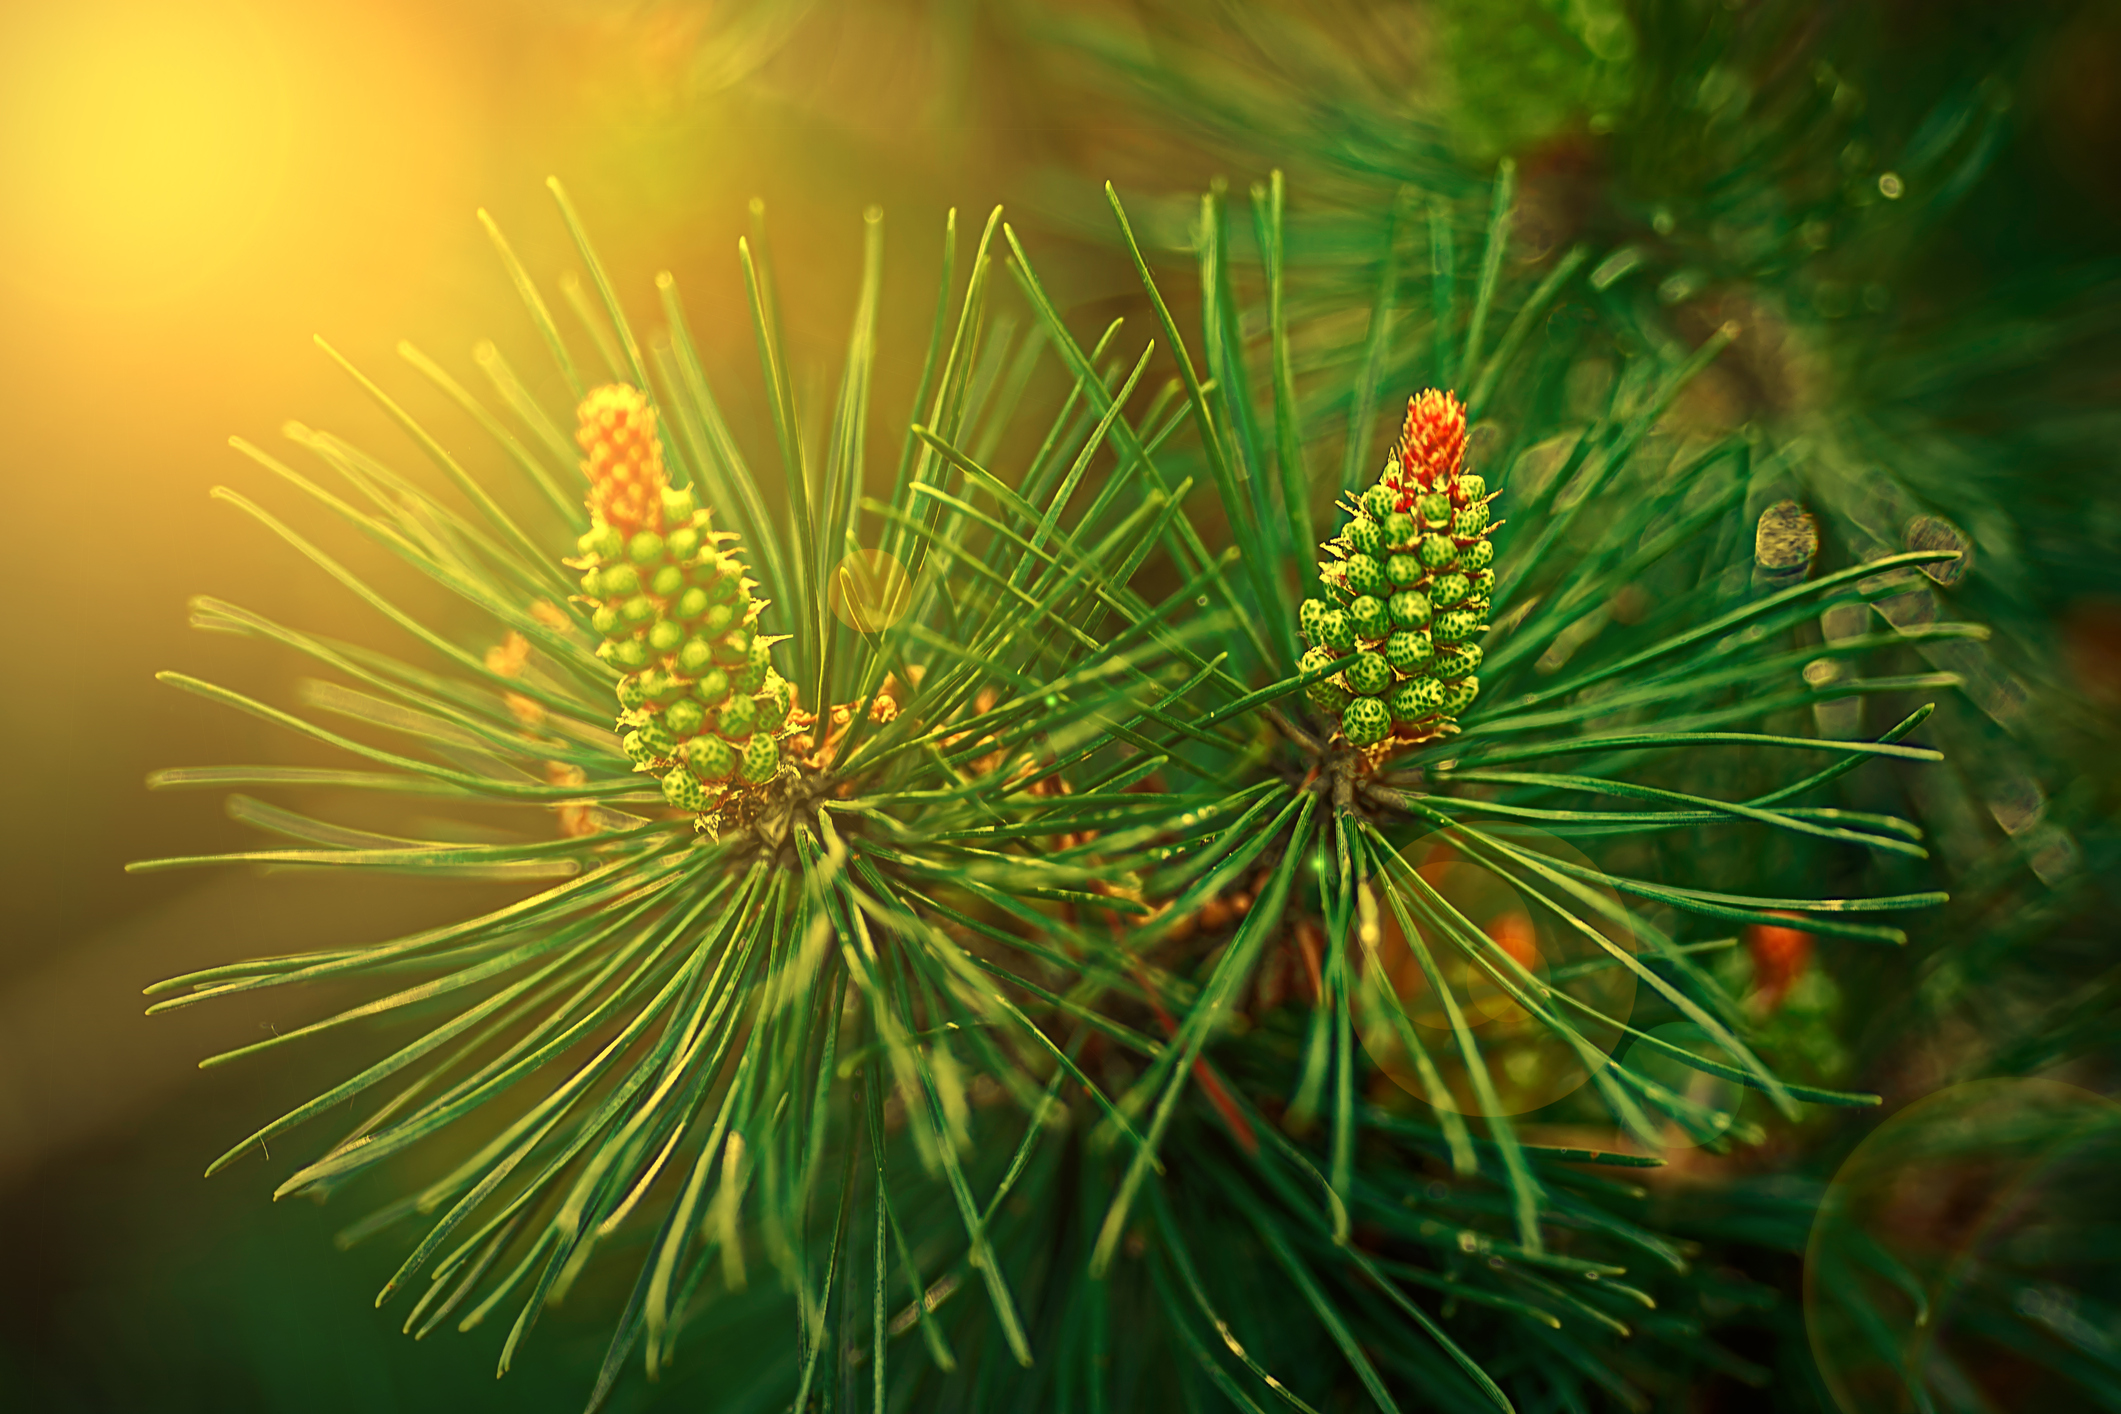 Where to Buy Pine Pollen, Its Benefits, Side Effects in Our Review